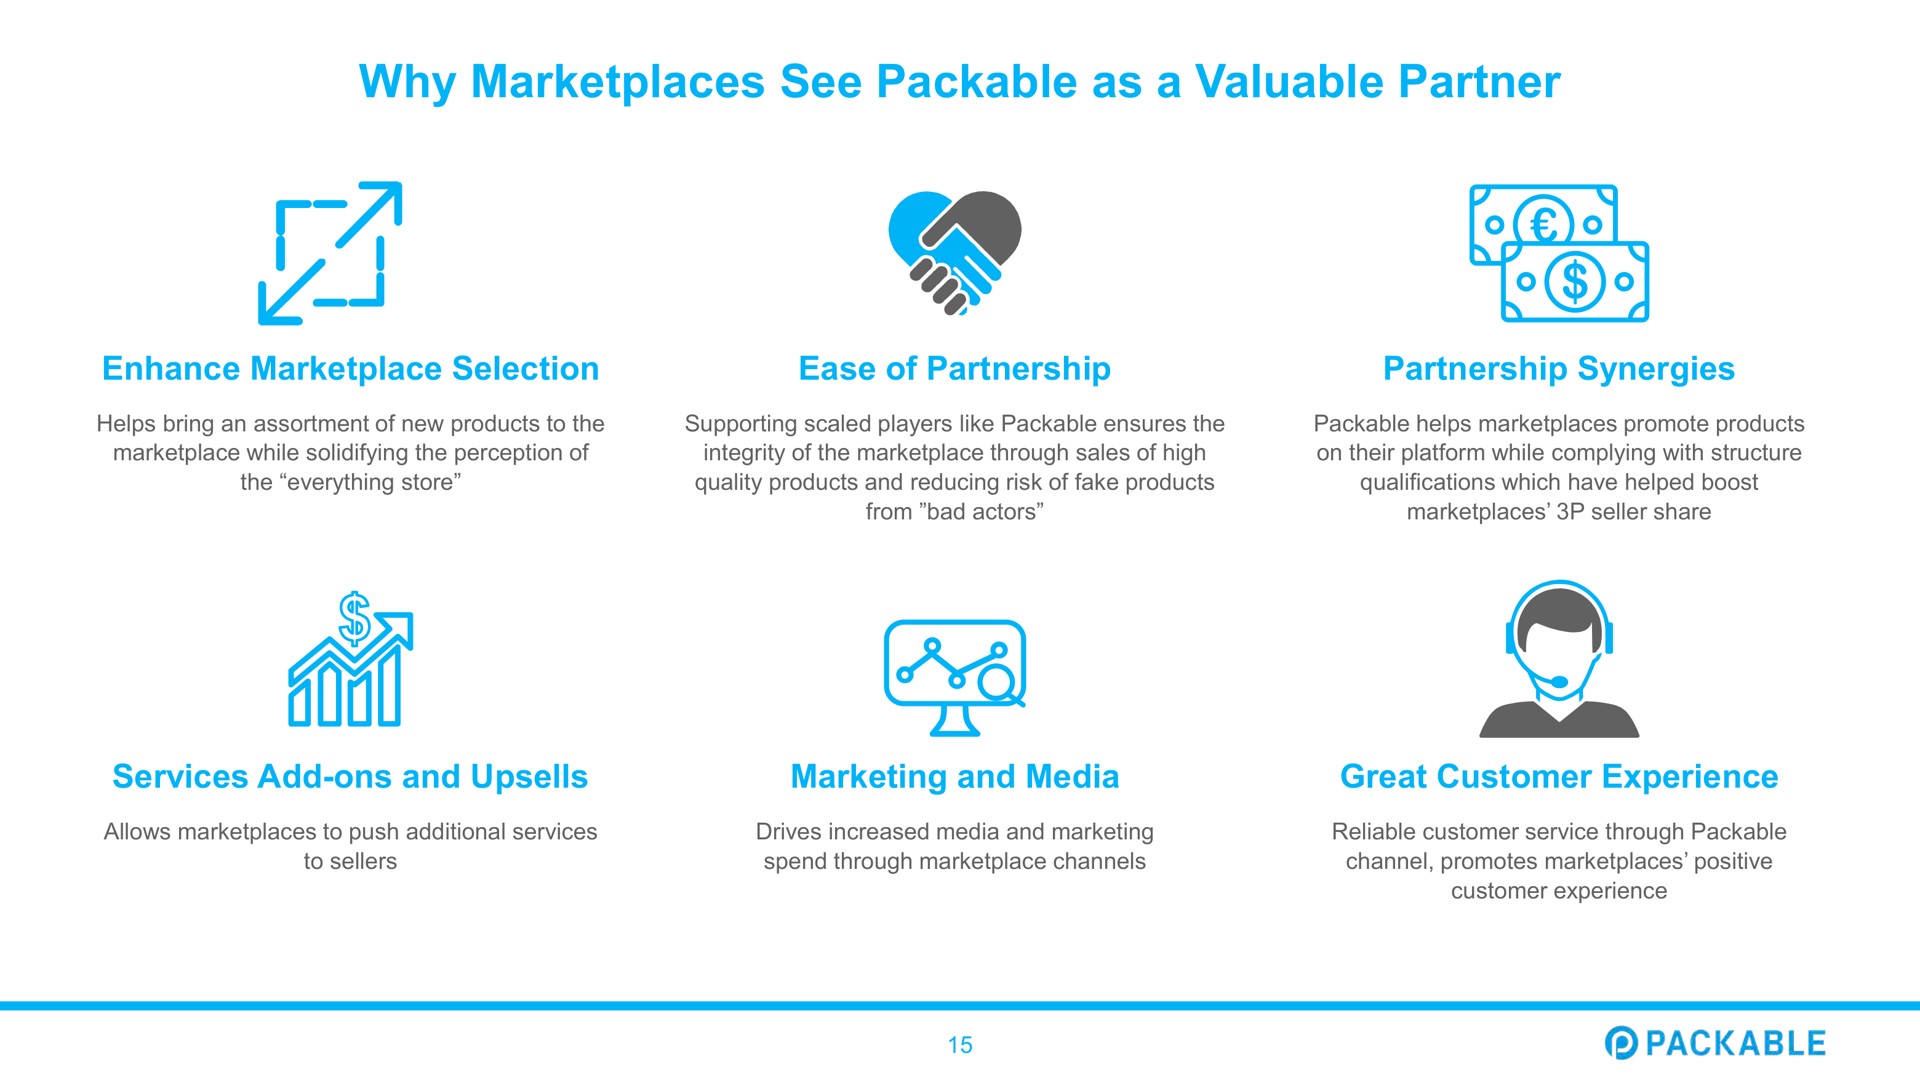 why see packable as a valuable partner | Packable